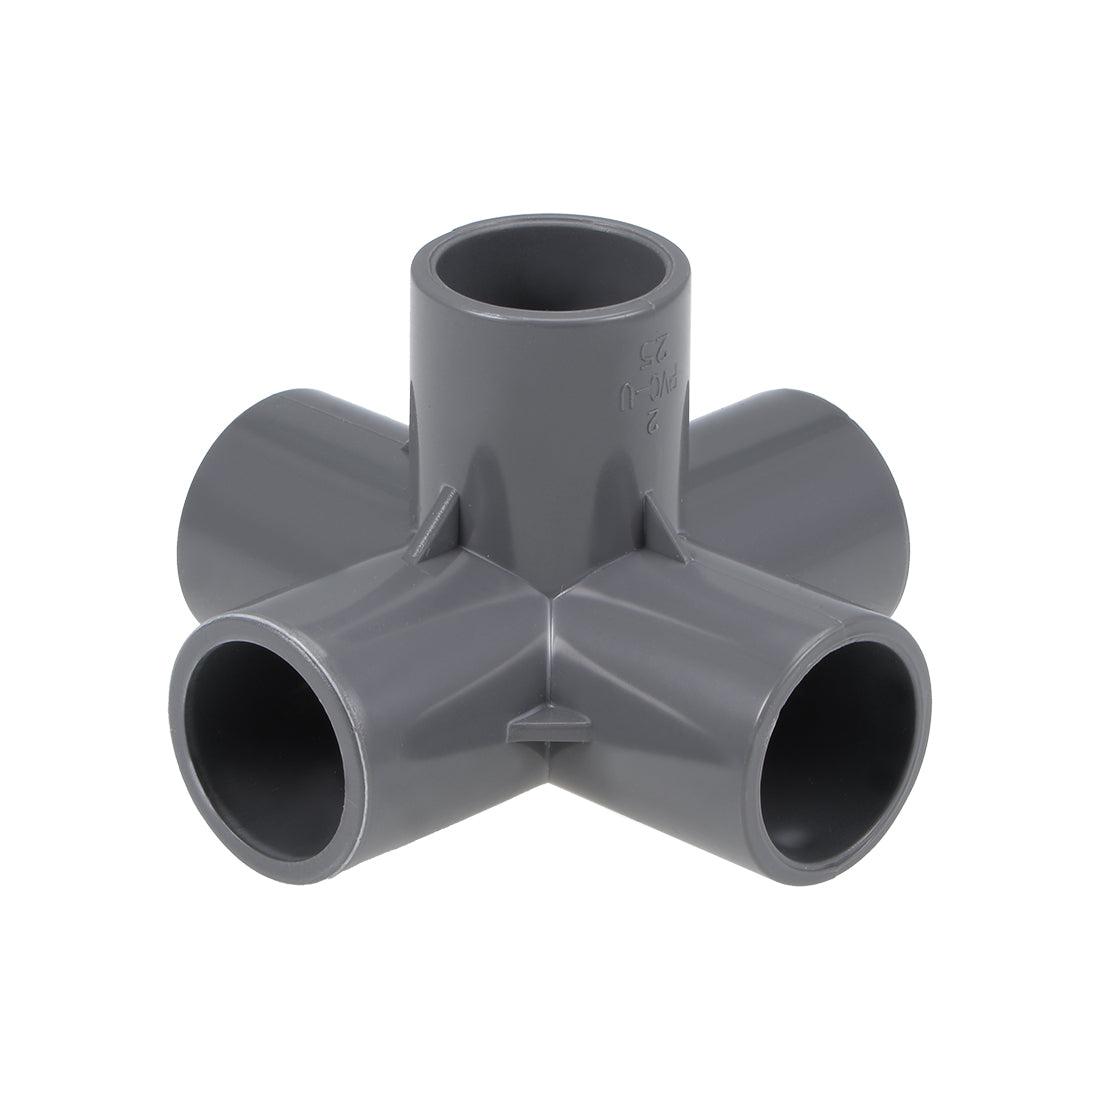 uxcell Uxcell 5 Way 25mm Tee Metric PVC Fitting Elbow - PVC Furniture Elbow Fittings Gray 10Pcs